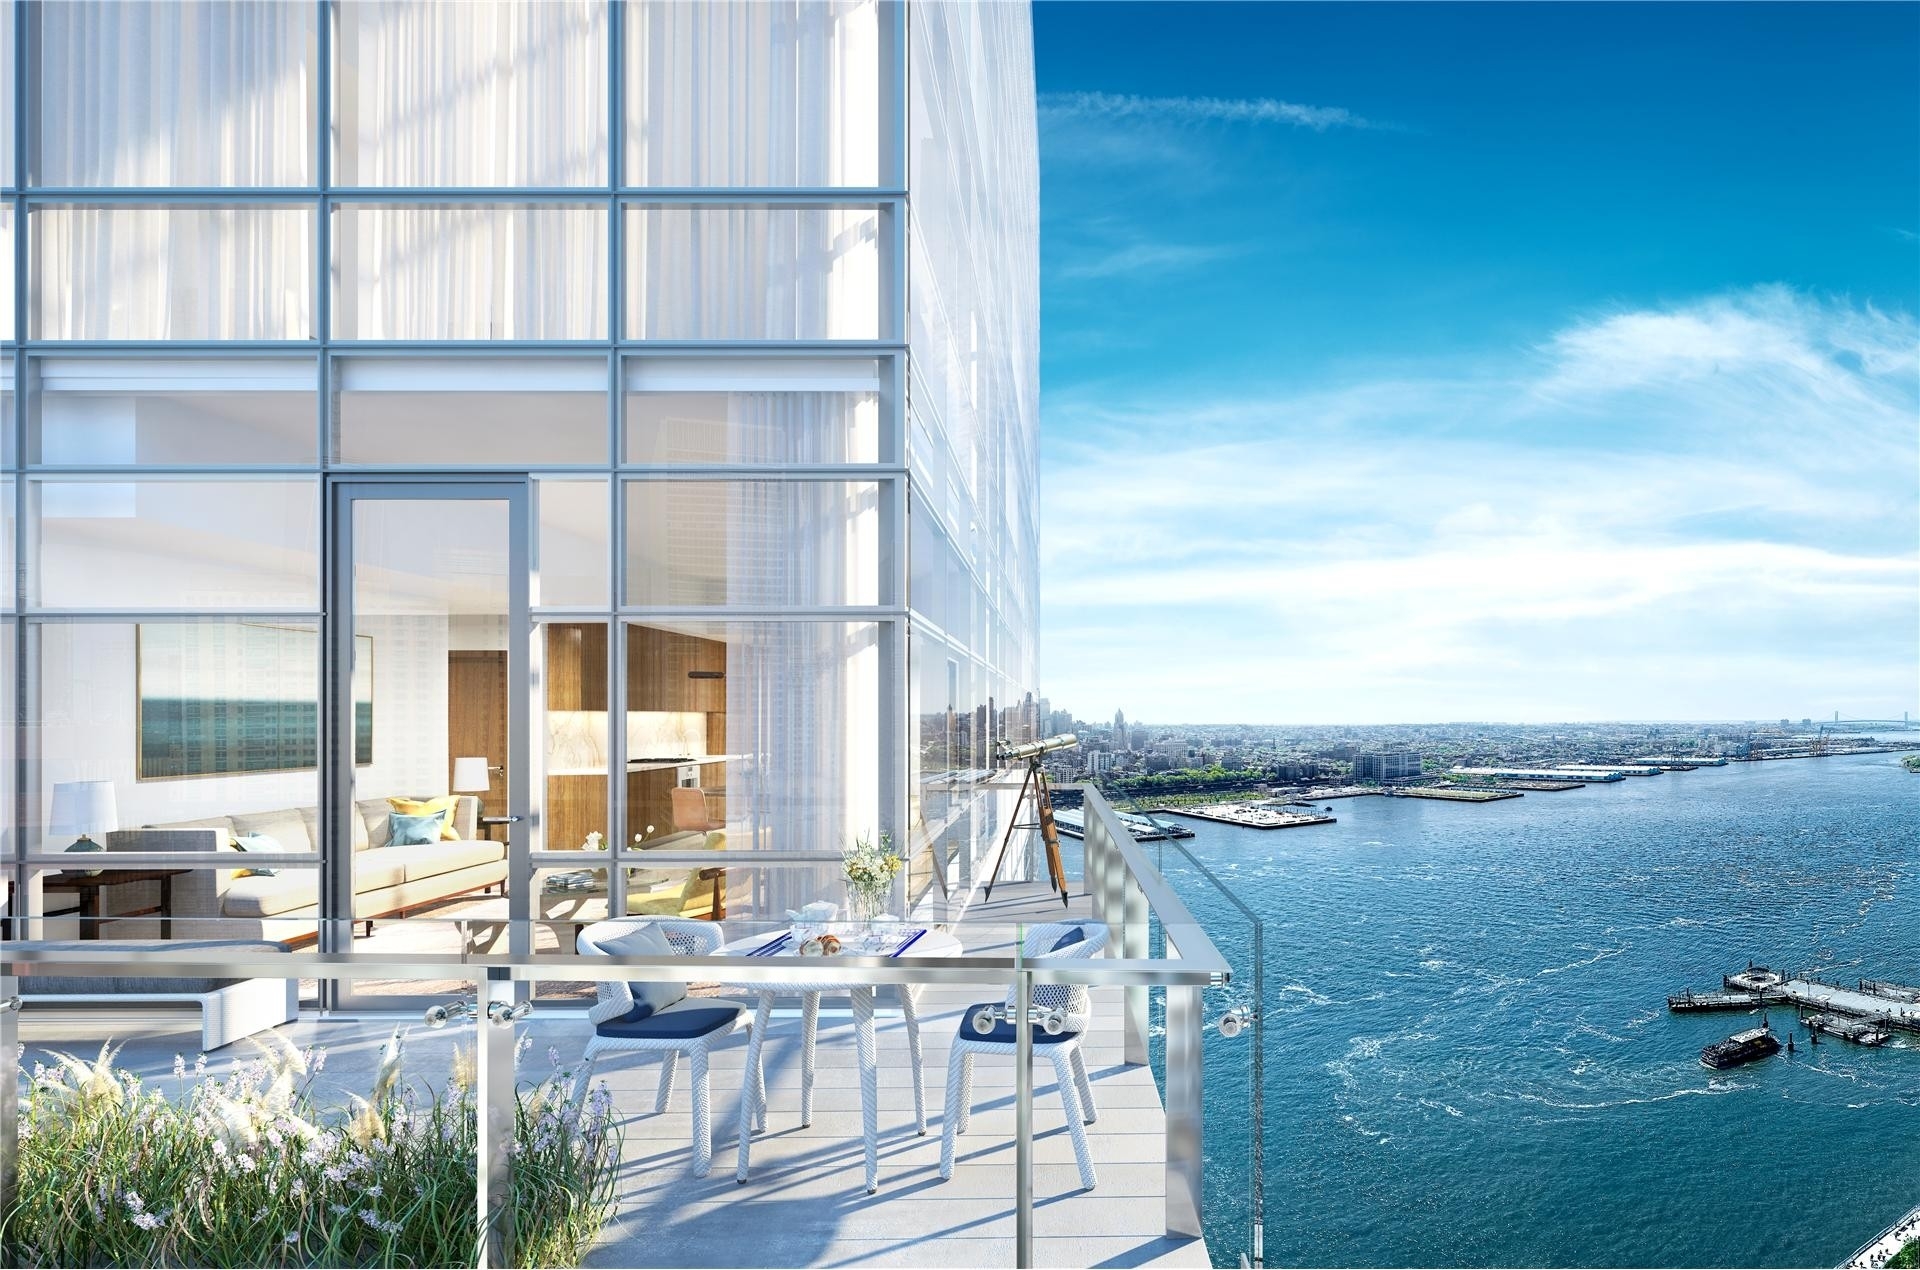 Condominium for Sale at Seaport Residences, 161 MAIDEN LN, 33A South Street Seaport, New York, New York 10038